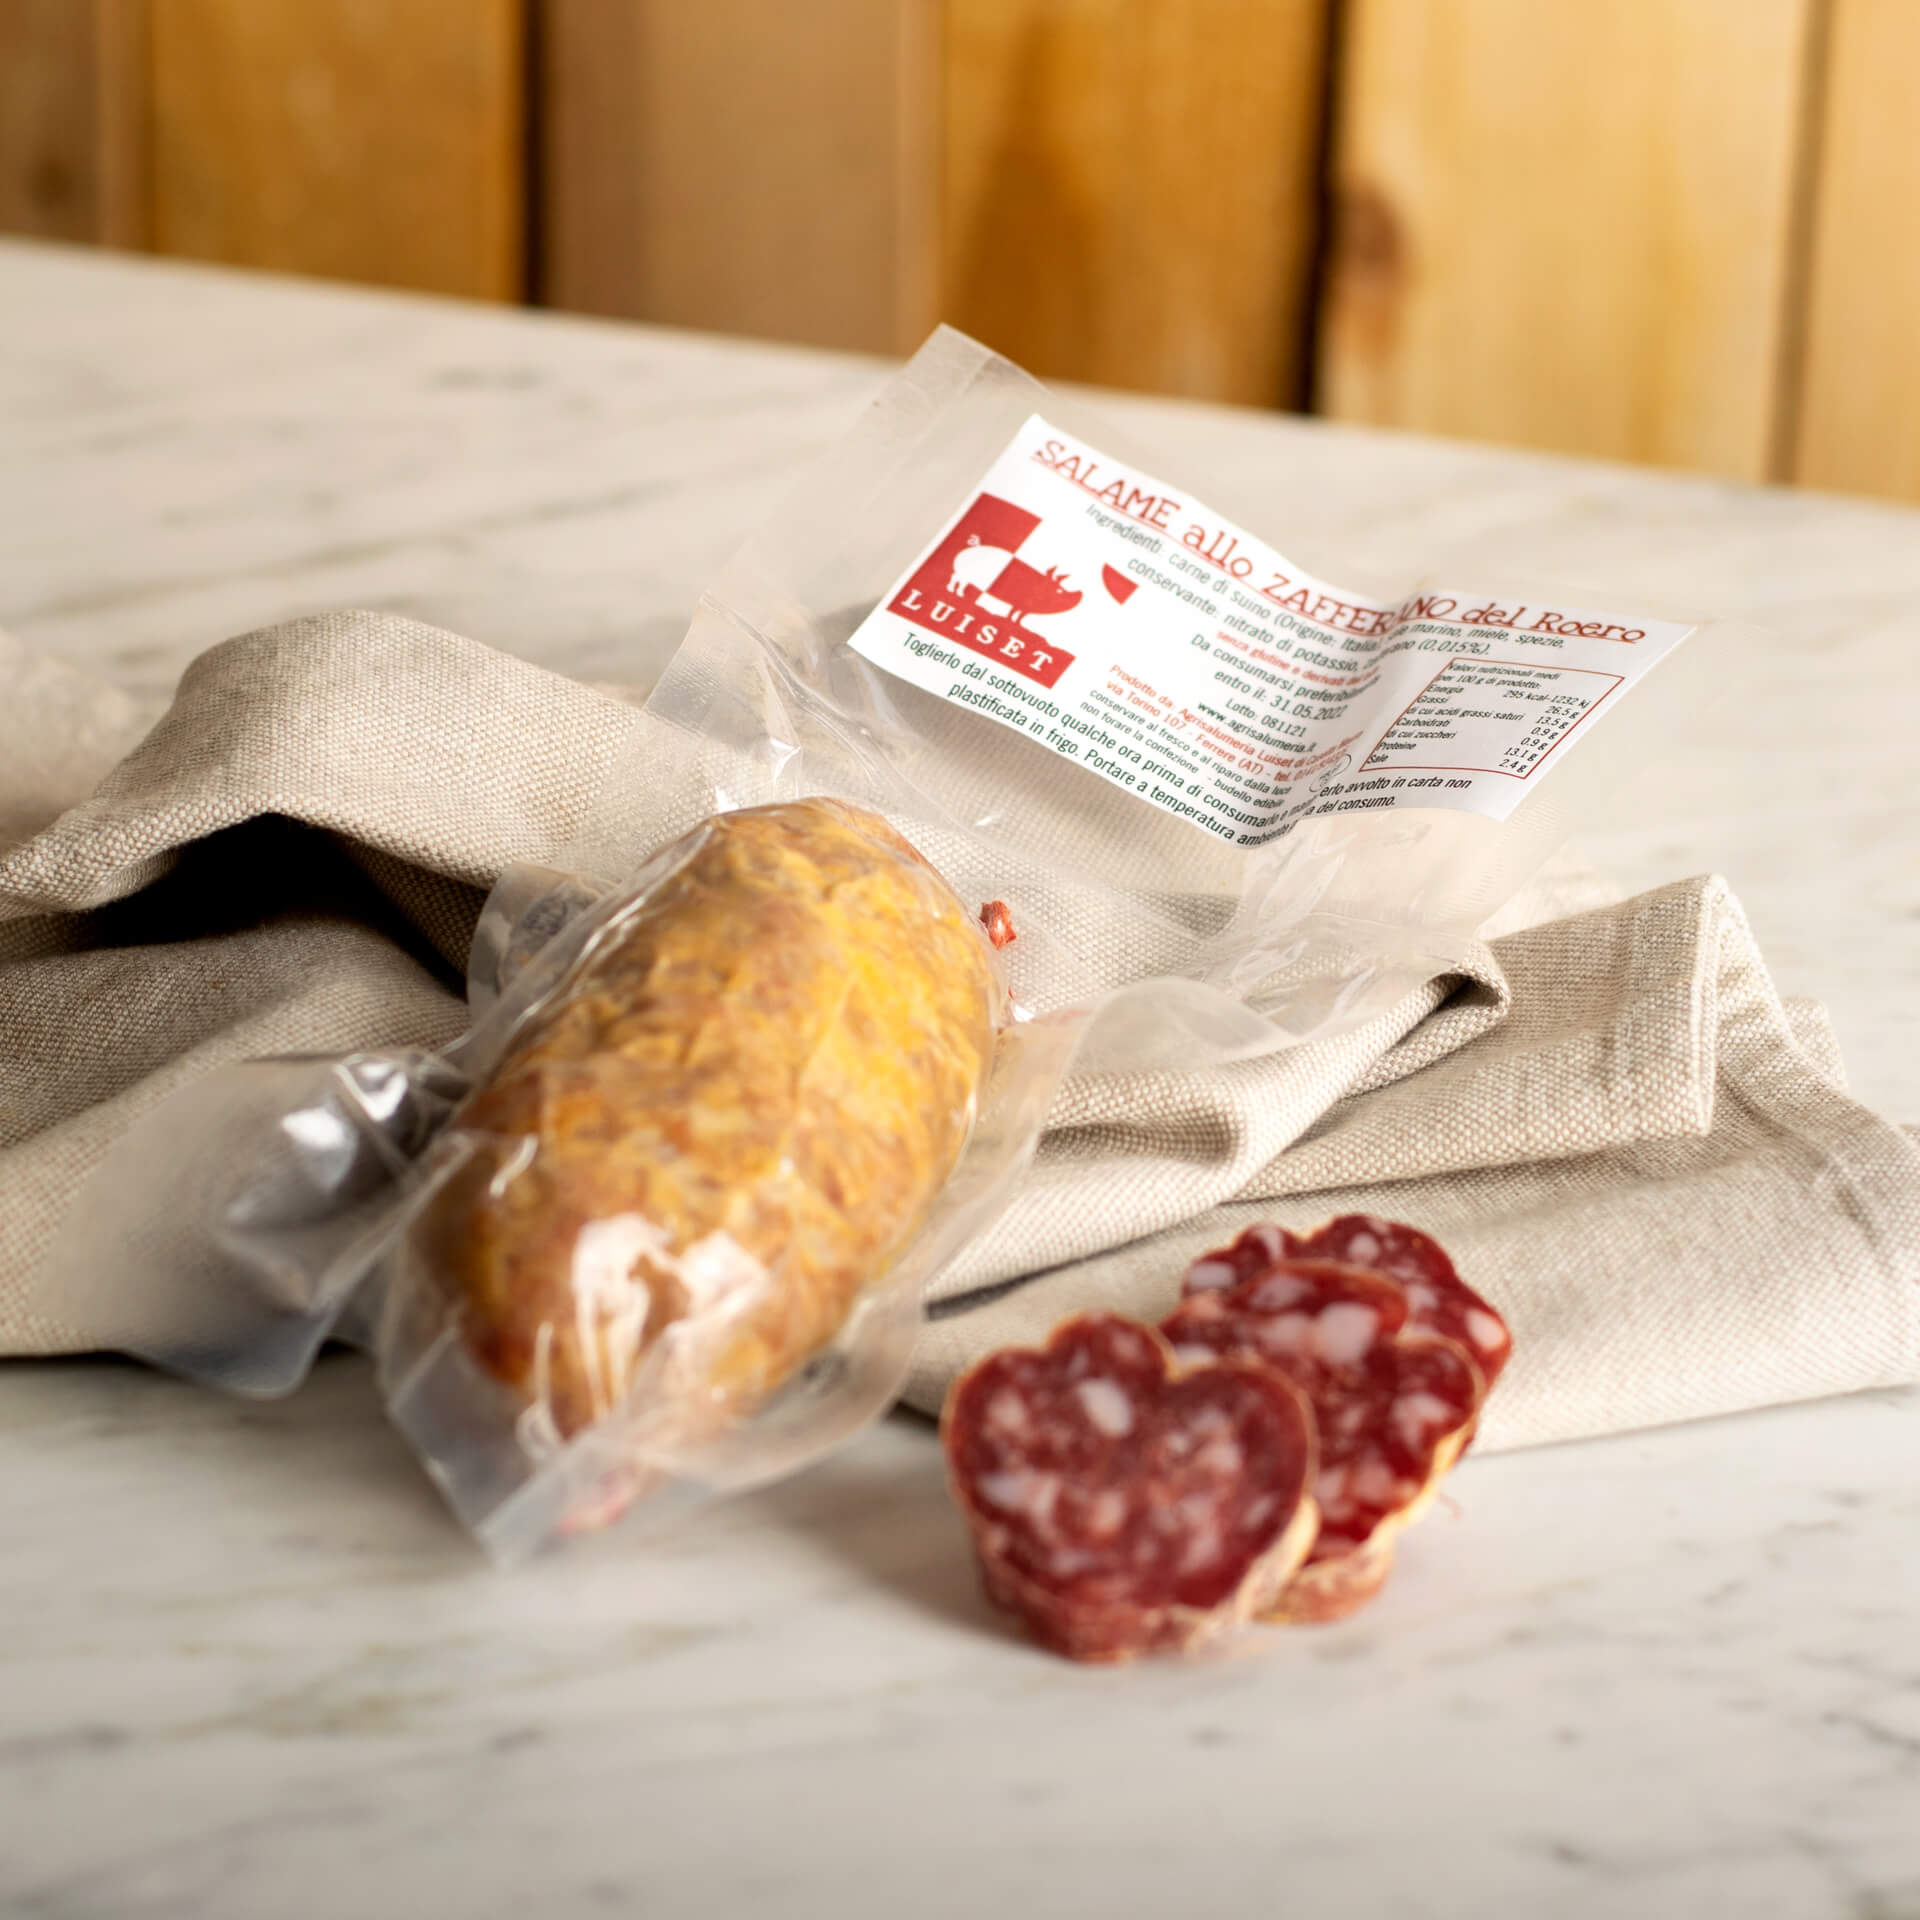 Salami with Saffron from Roero